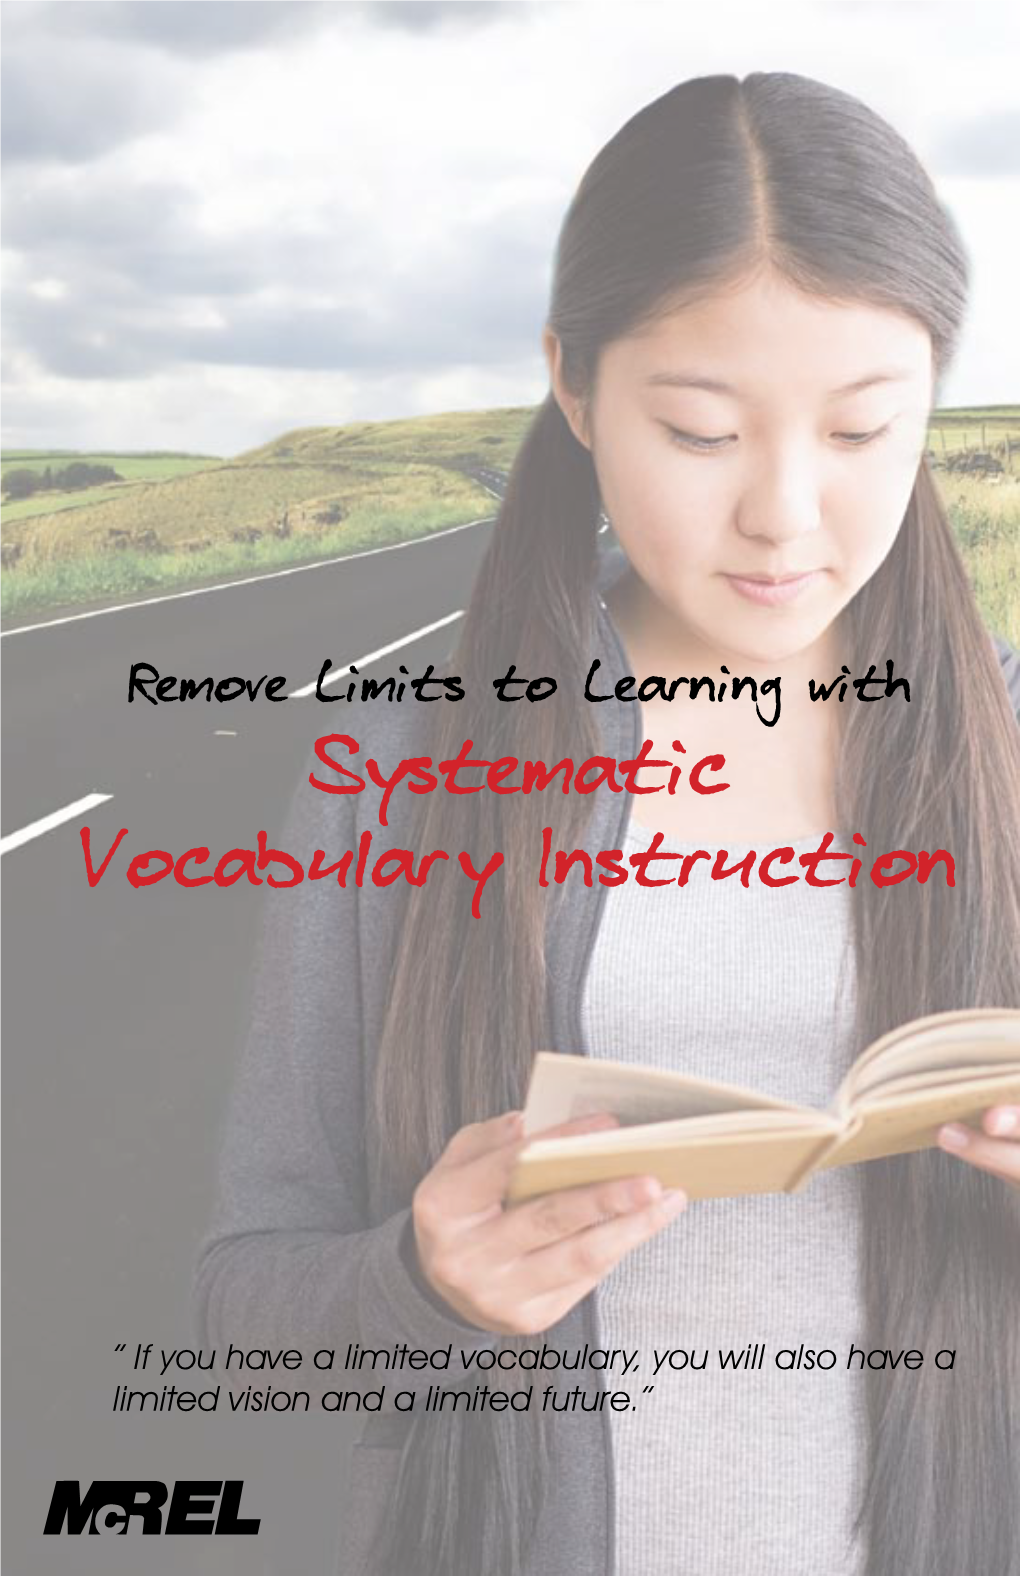 Remove Limits to Learning with Systematic Vocabulary Instruction